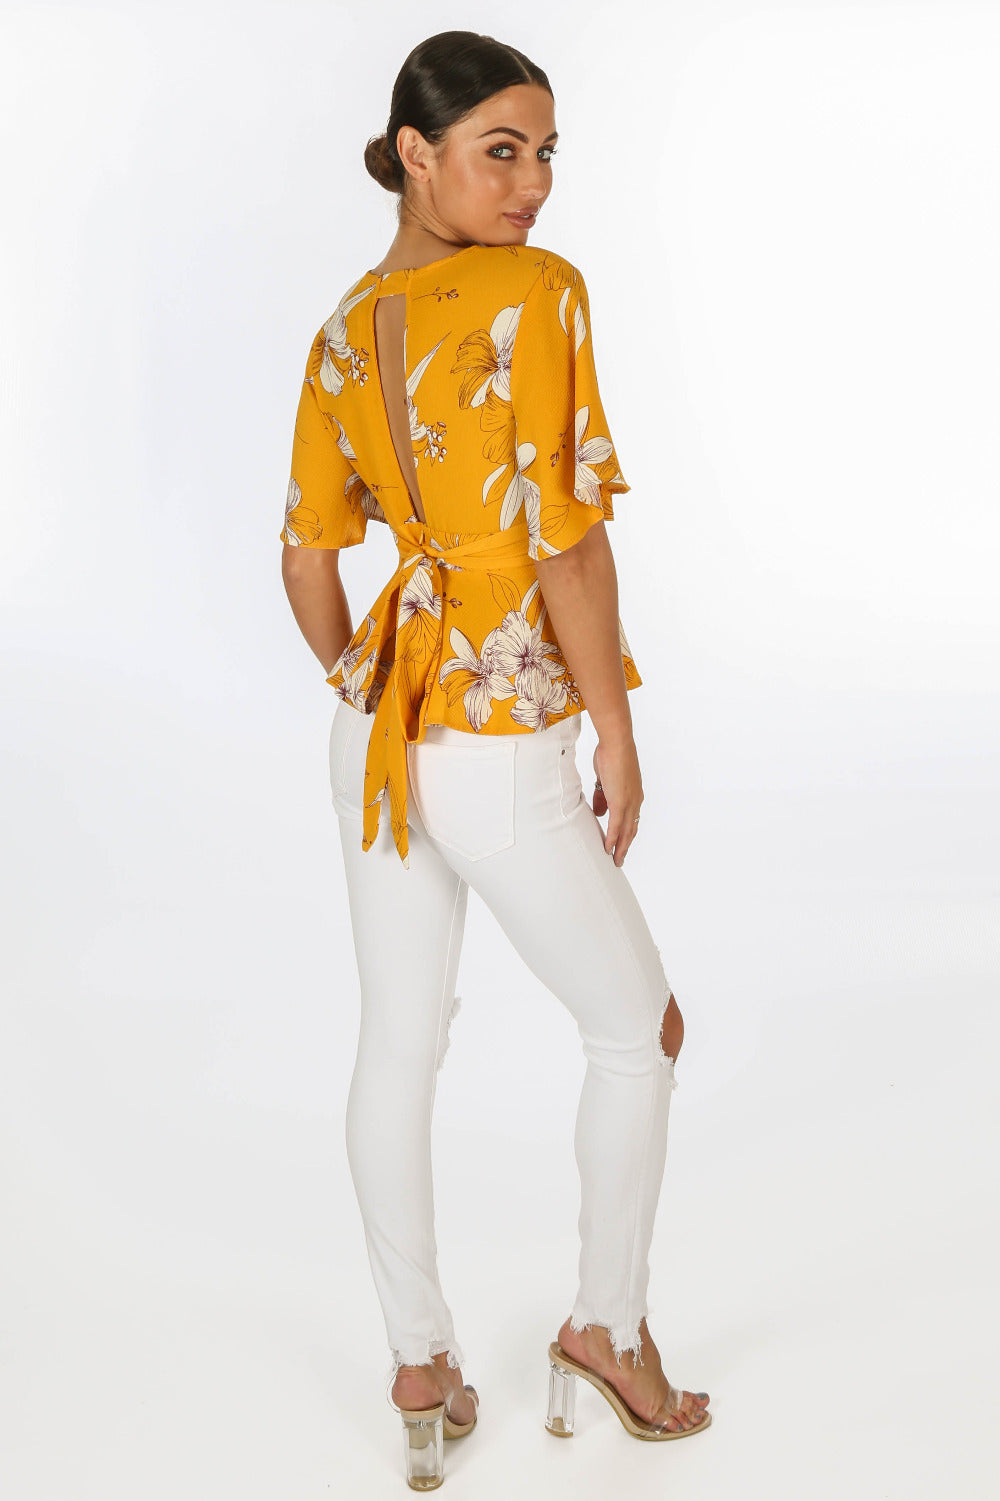 Yellow Floral Peplum Tie Back Blouse